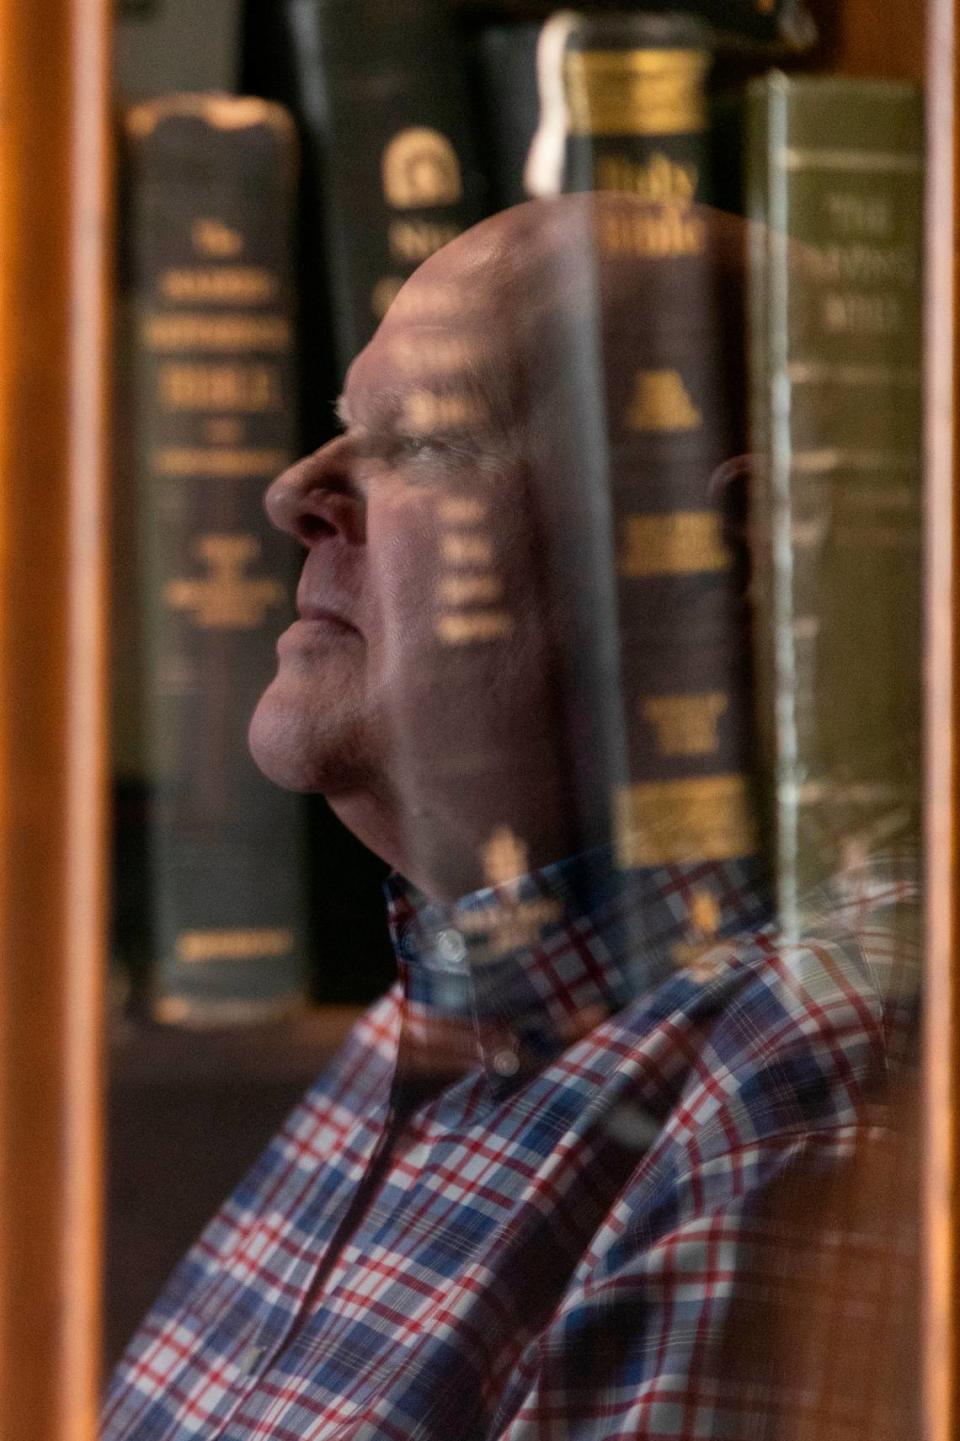 Jim Harvey, who helped craft S.C. execution protocols and oversaw 13 executions, is reflected in his collection of Bibles in 2021.